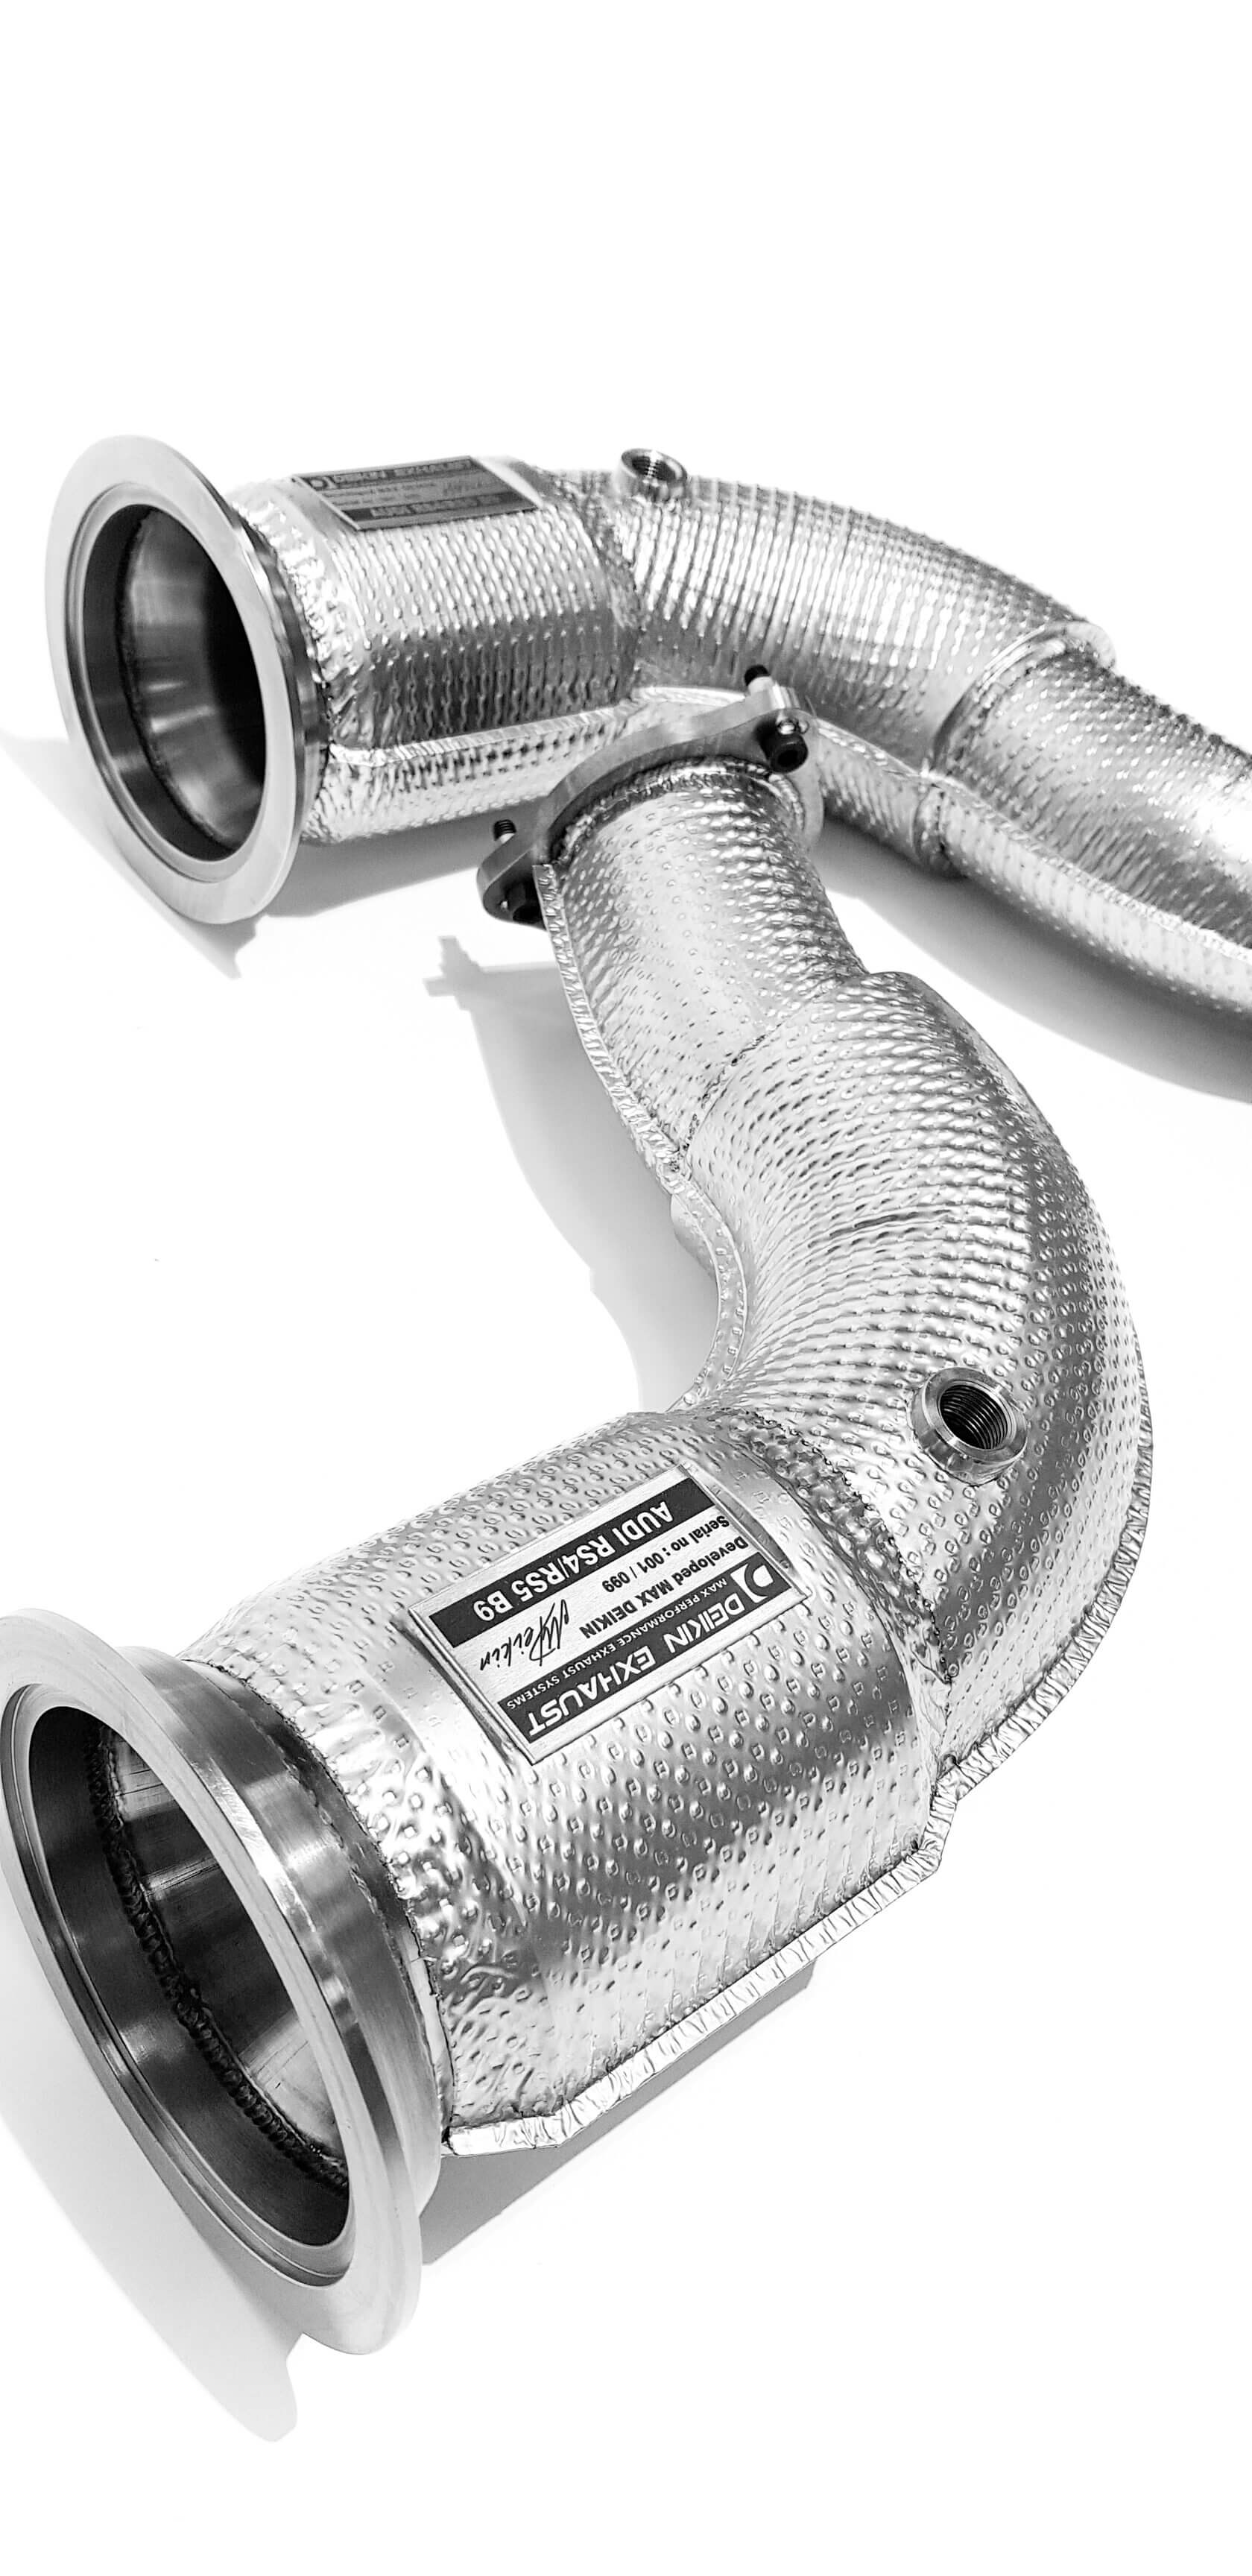 DEIKIN 10-AUDI.RS5.B9-DPT Downpipe for AUDI RS5 (B9) with thermal insulation HeatShield Photo-0 